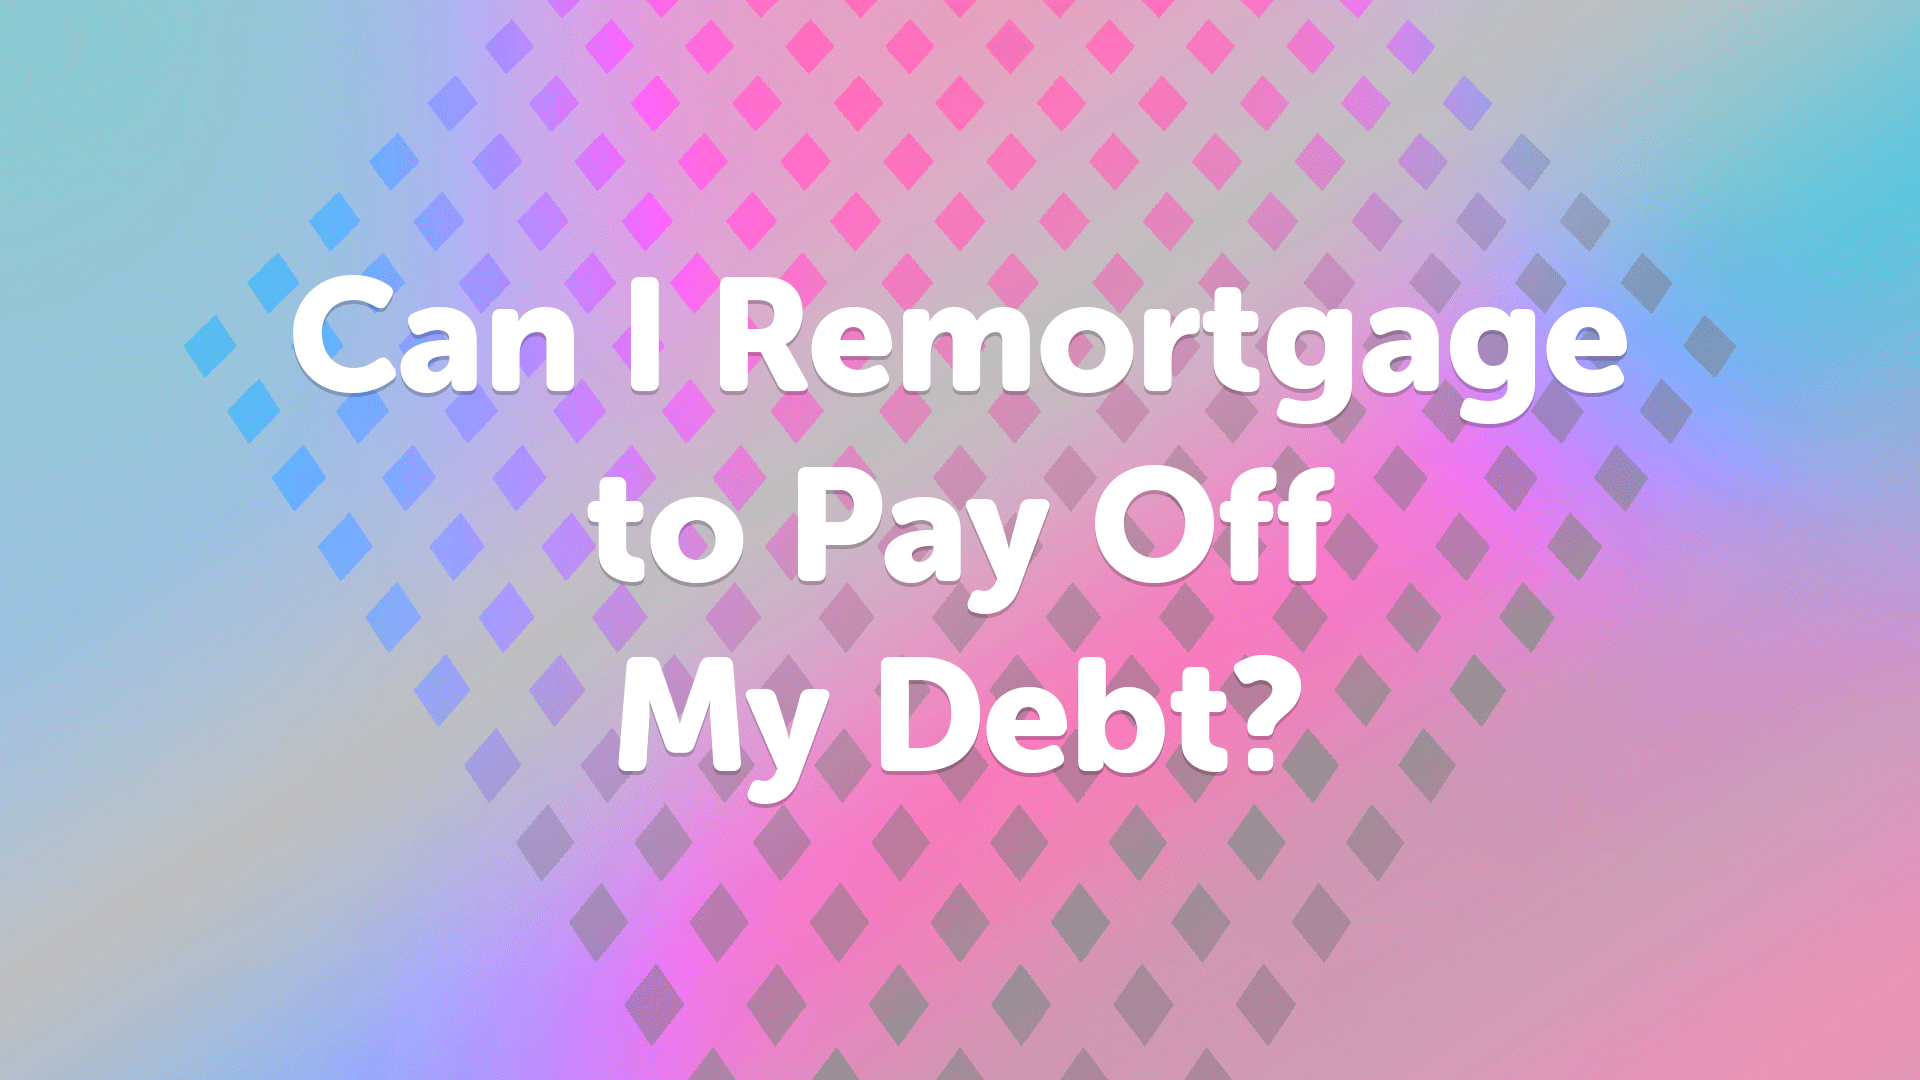 Can I remortgage to pay off my debt? | Remortgage Advice in Sunderland by Sunderlandmoneyman